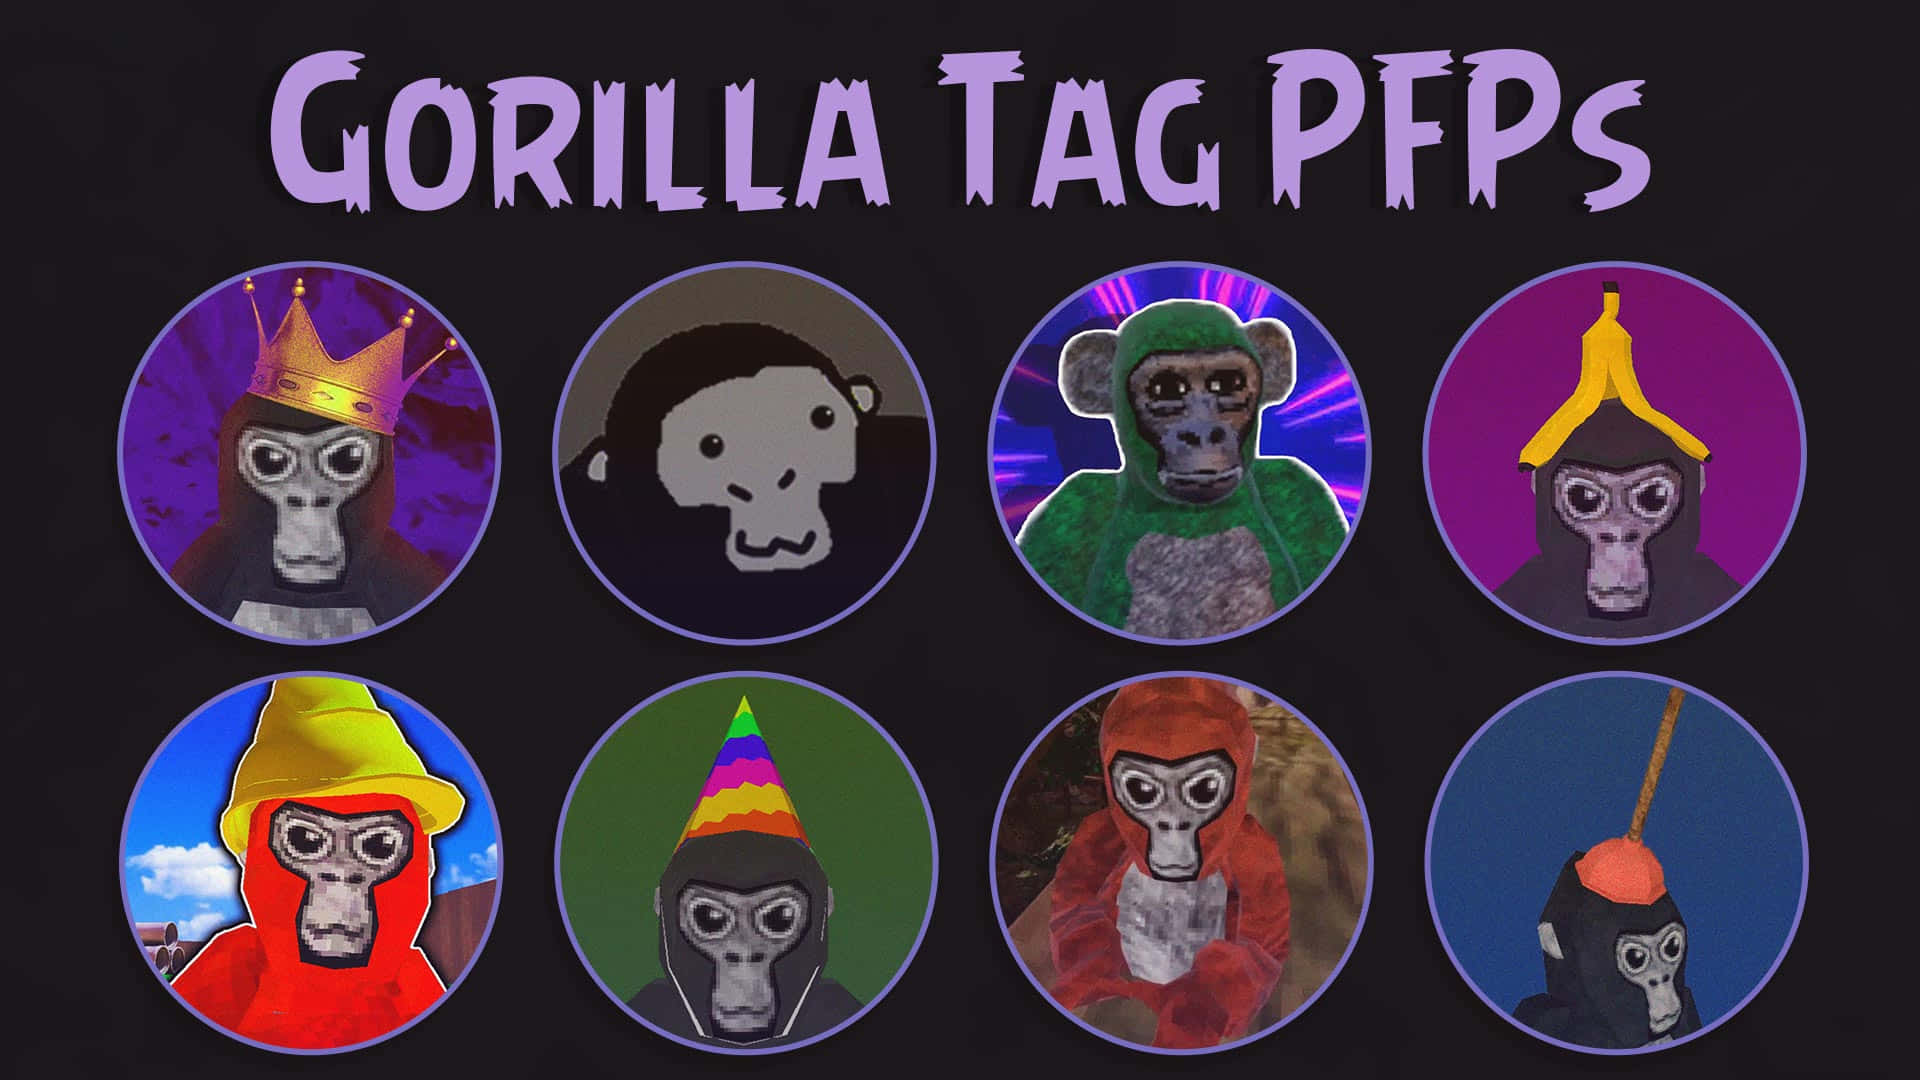 Download Gorilla Tag Wallpaper HD android on PC